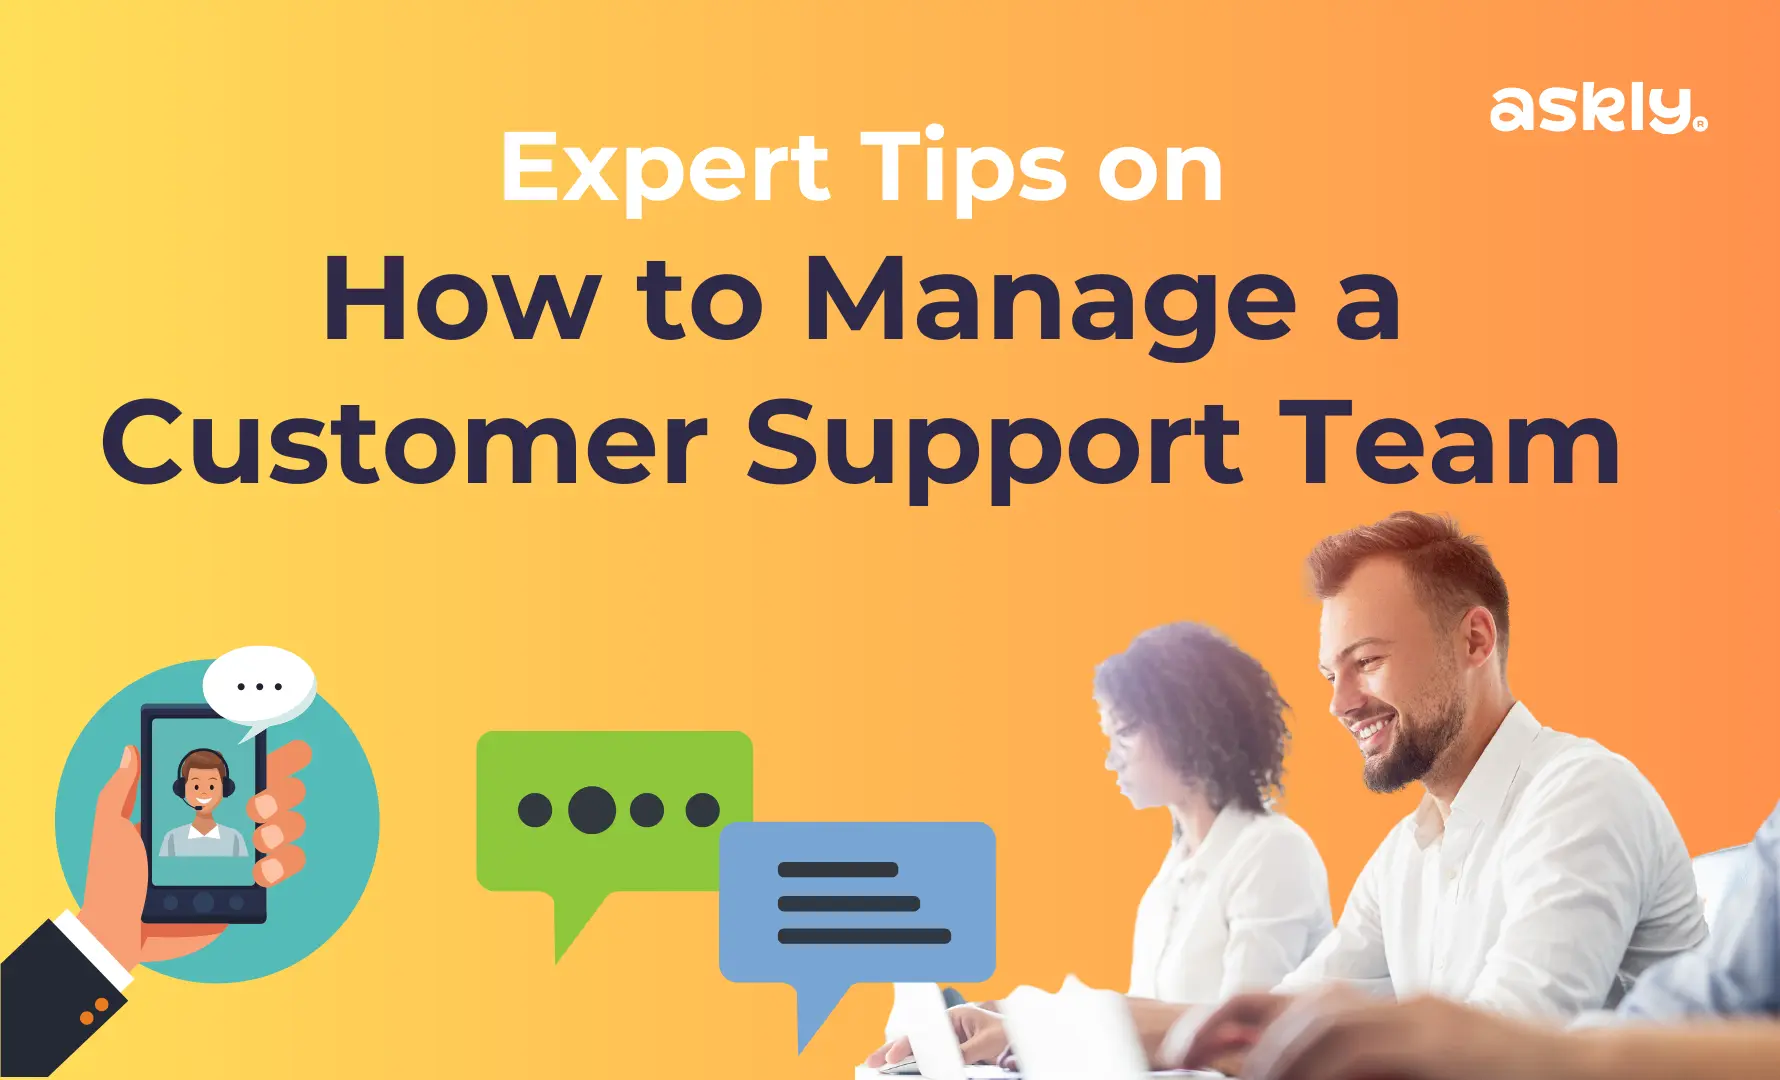 Expert Tips on How to Manage a Customer Support Team